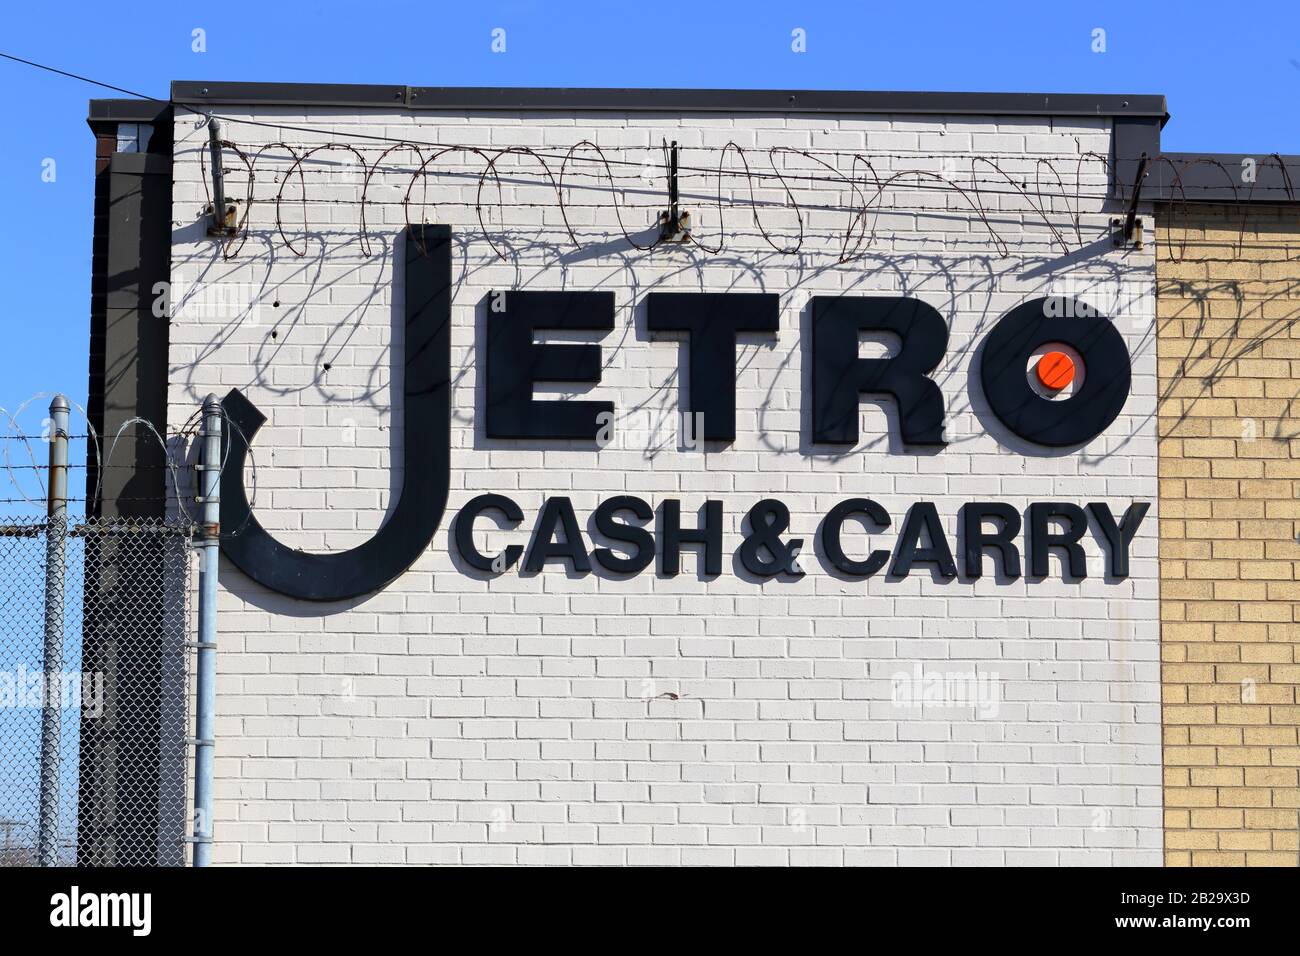 Jetro Cash & Carry logo on a brick wall adorned with barbed wire at one of their restaurant supply stores in New York, NY. Stock Photo